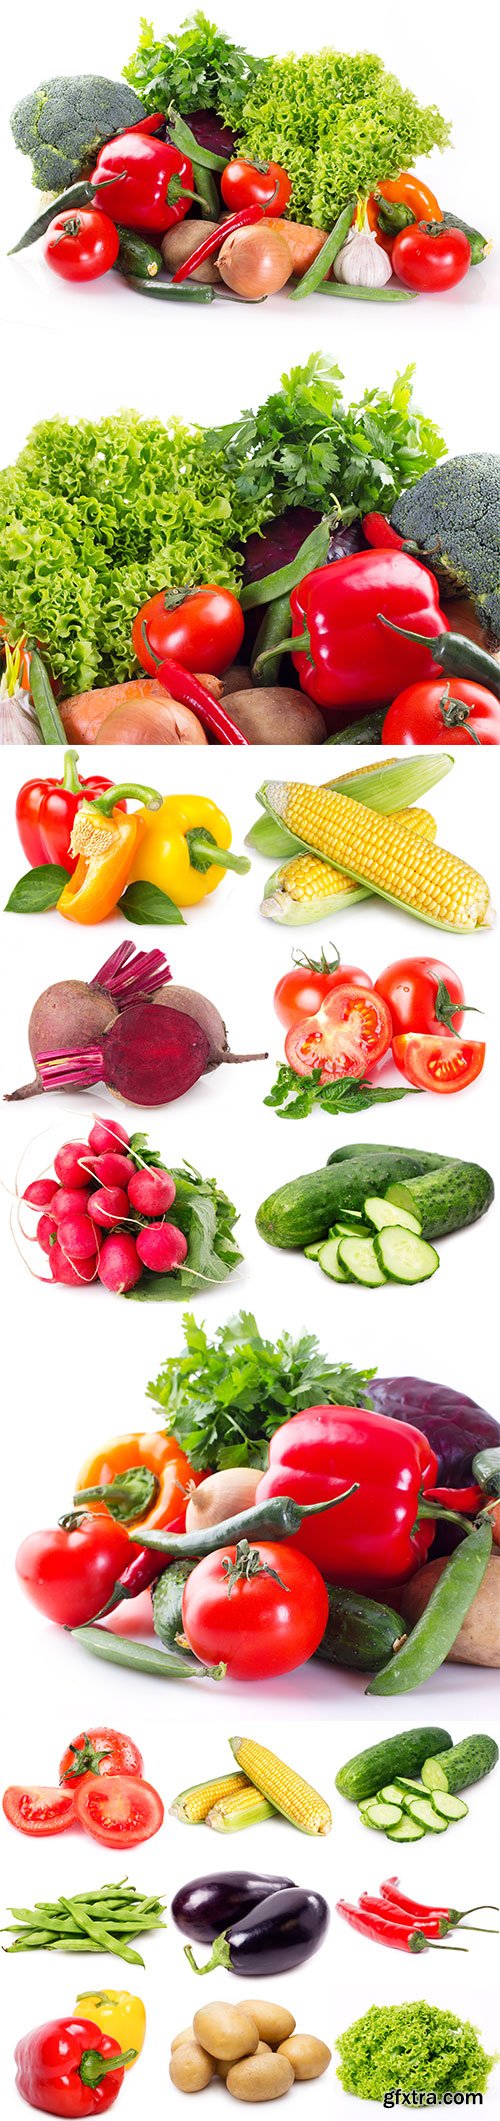 Photo - Colection Of Fresh Vegetables Isolated - 5xJPGS